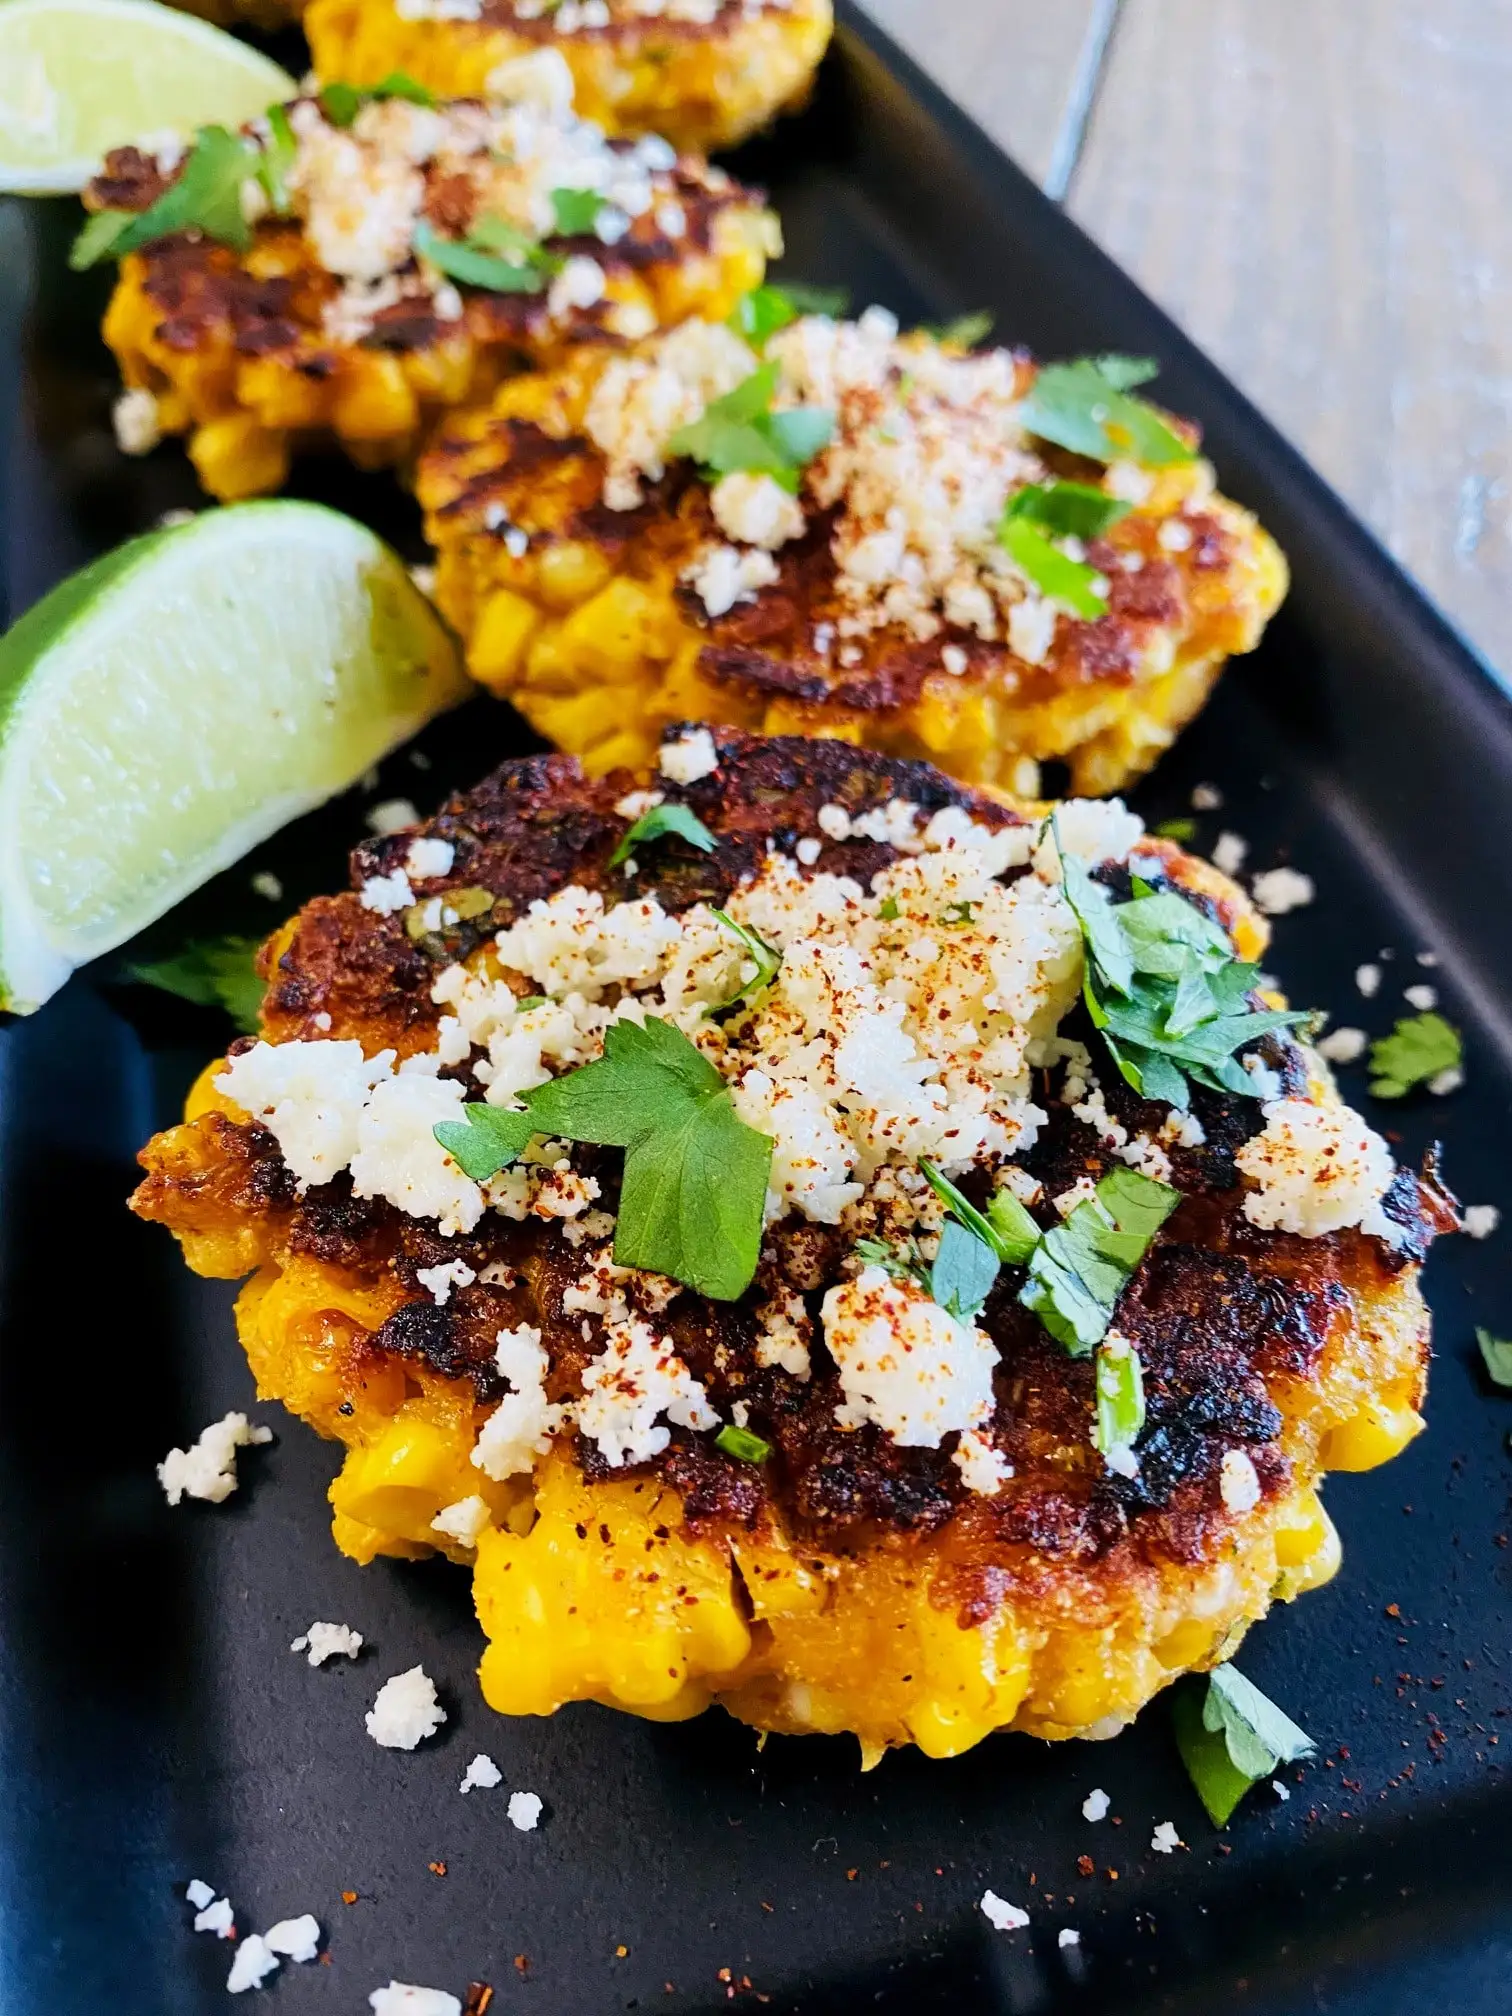 Corn fritters topped with cheese, spices, and cilantro.